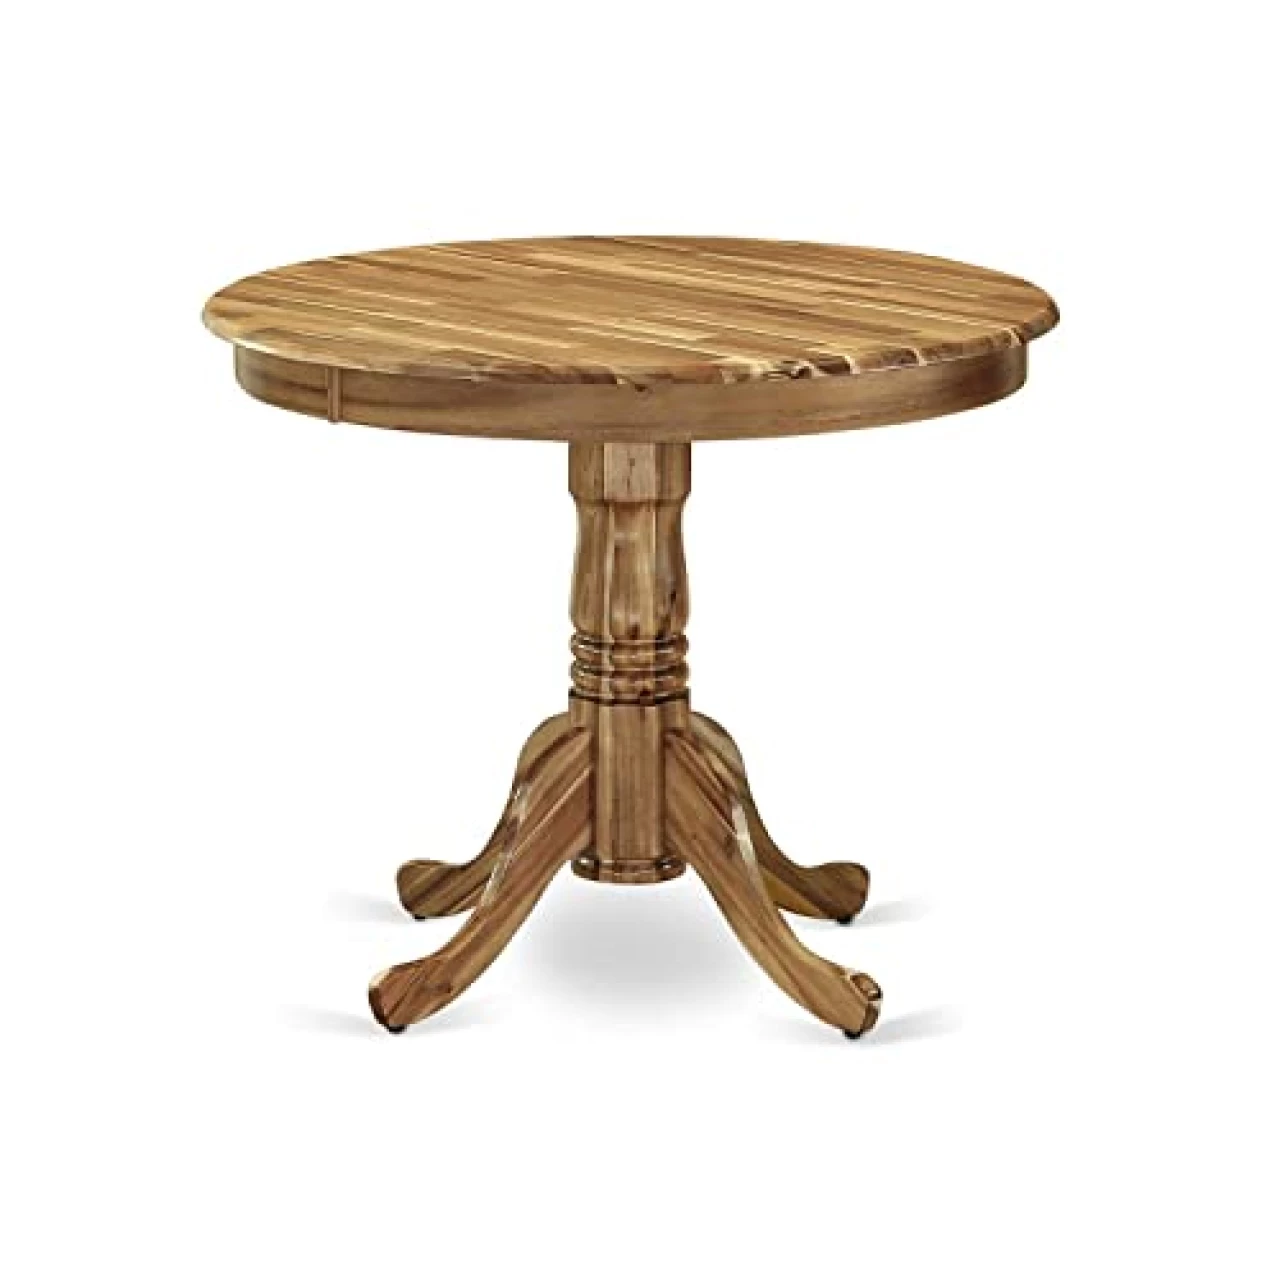 East West Furniture ANT-ANA-TP Antique Dining Room Round Kitchen Table Top with Pedestal Base, 36x36 Inch, Natural